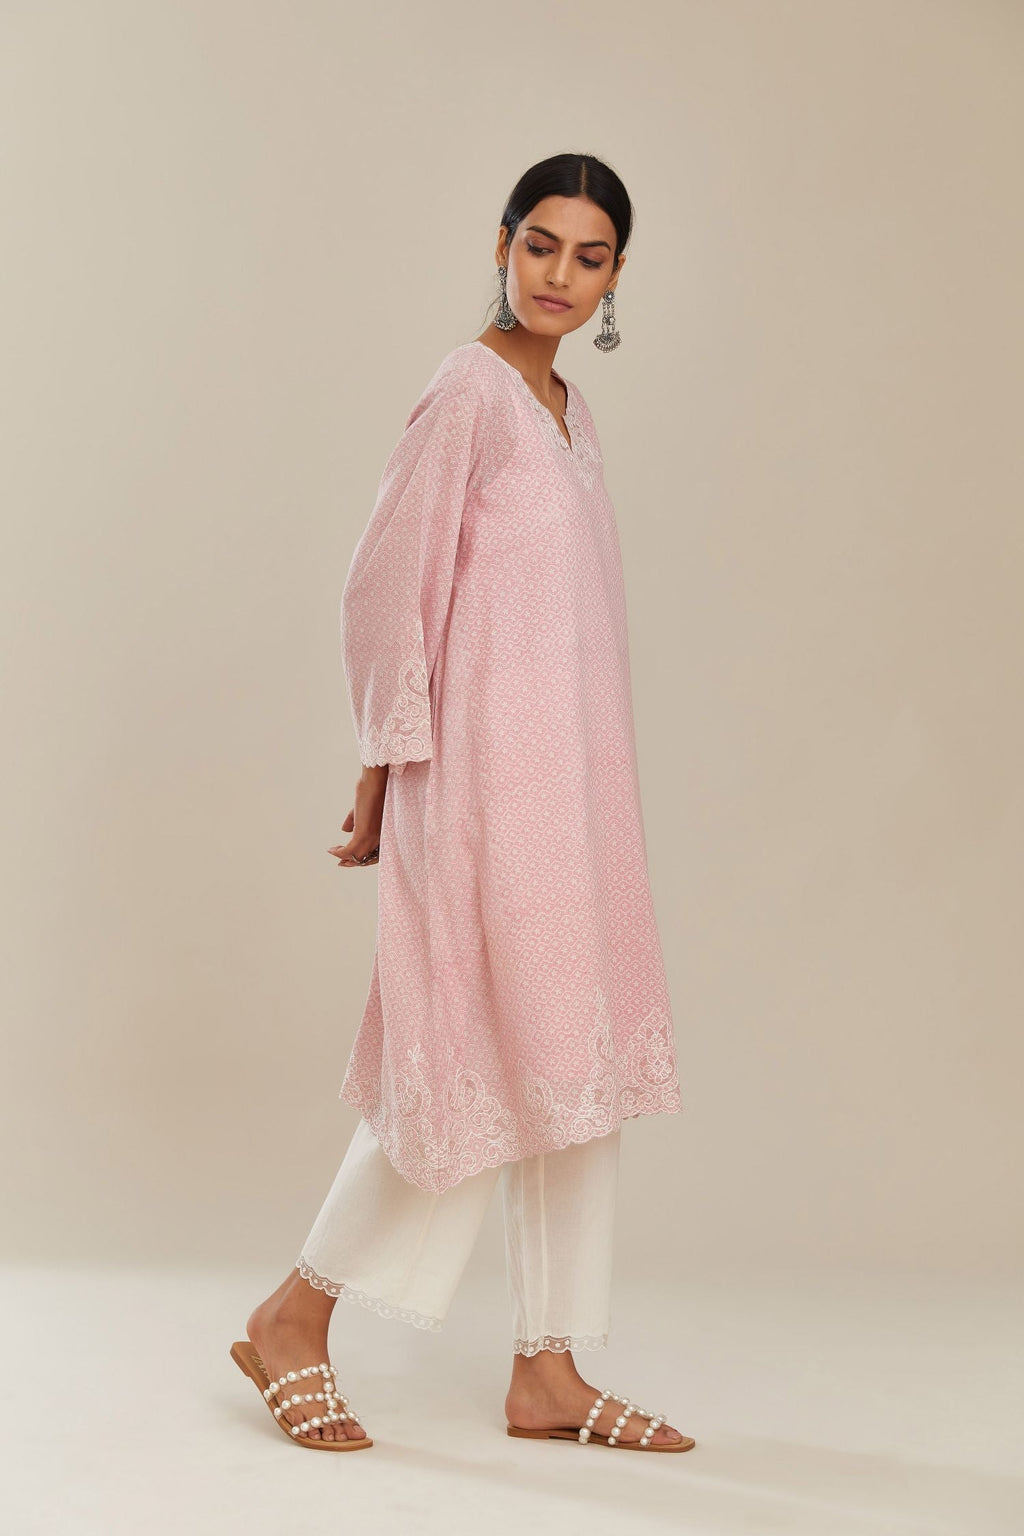 A-line hand block over-printed pink kurta set with bell sleeves and cutwork embroidery with sequins.